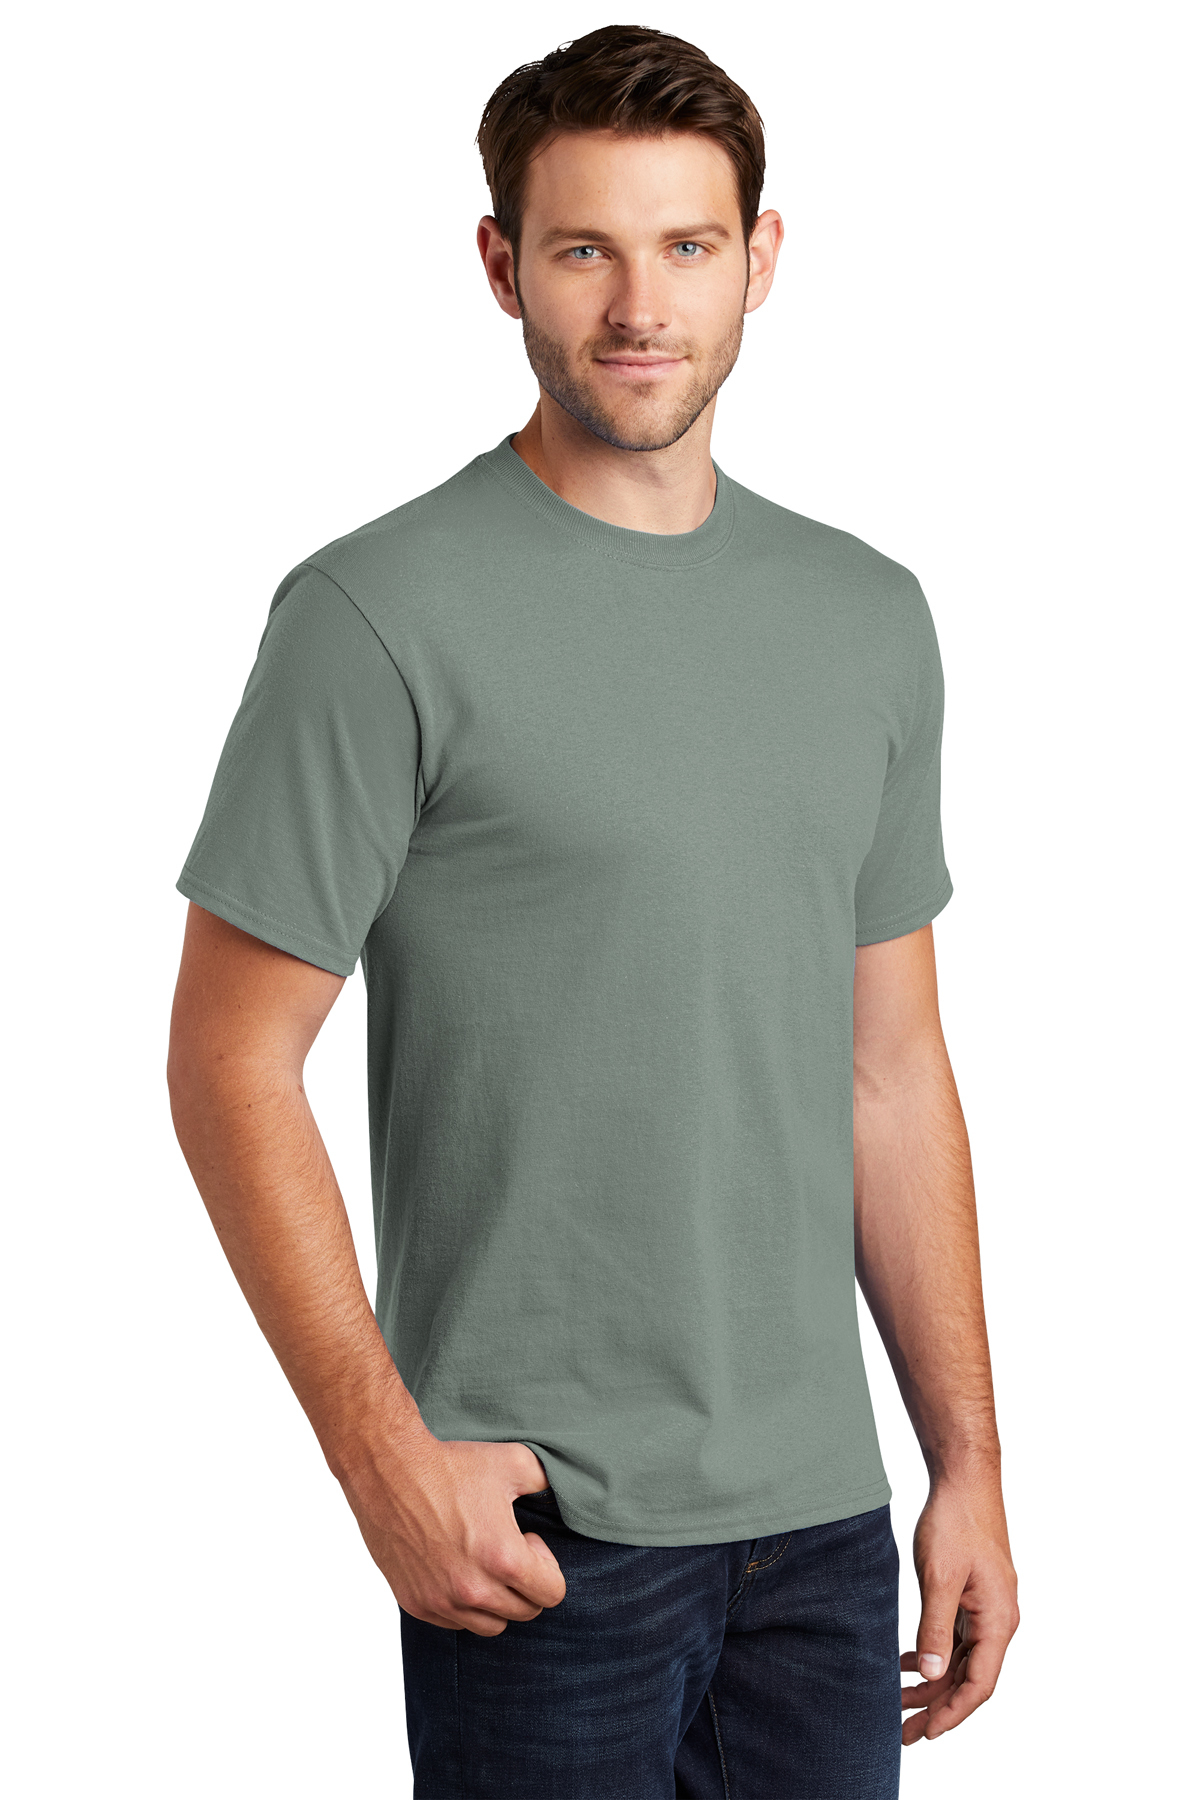 Port & Company Tall Essential Tee | Product | SanMar